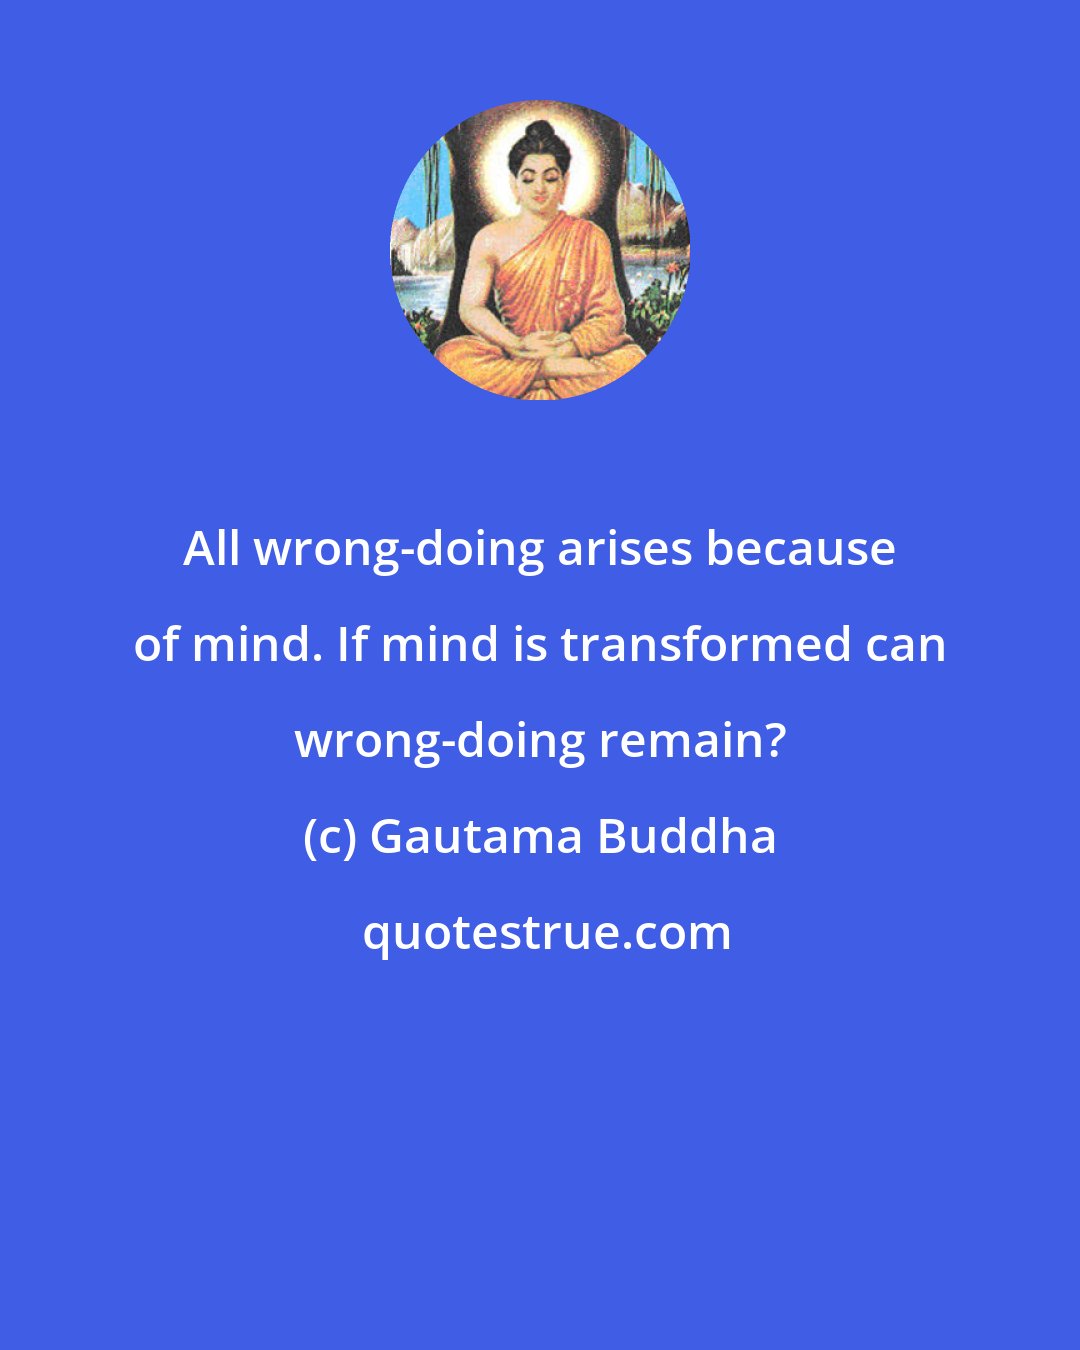 Gautama Buddha: All wrong-doing arises because of mind. If mind is transformed can wrong-doing remain?